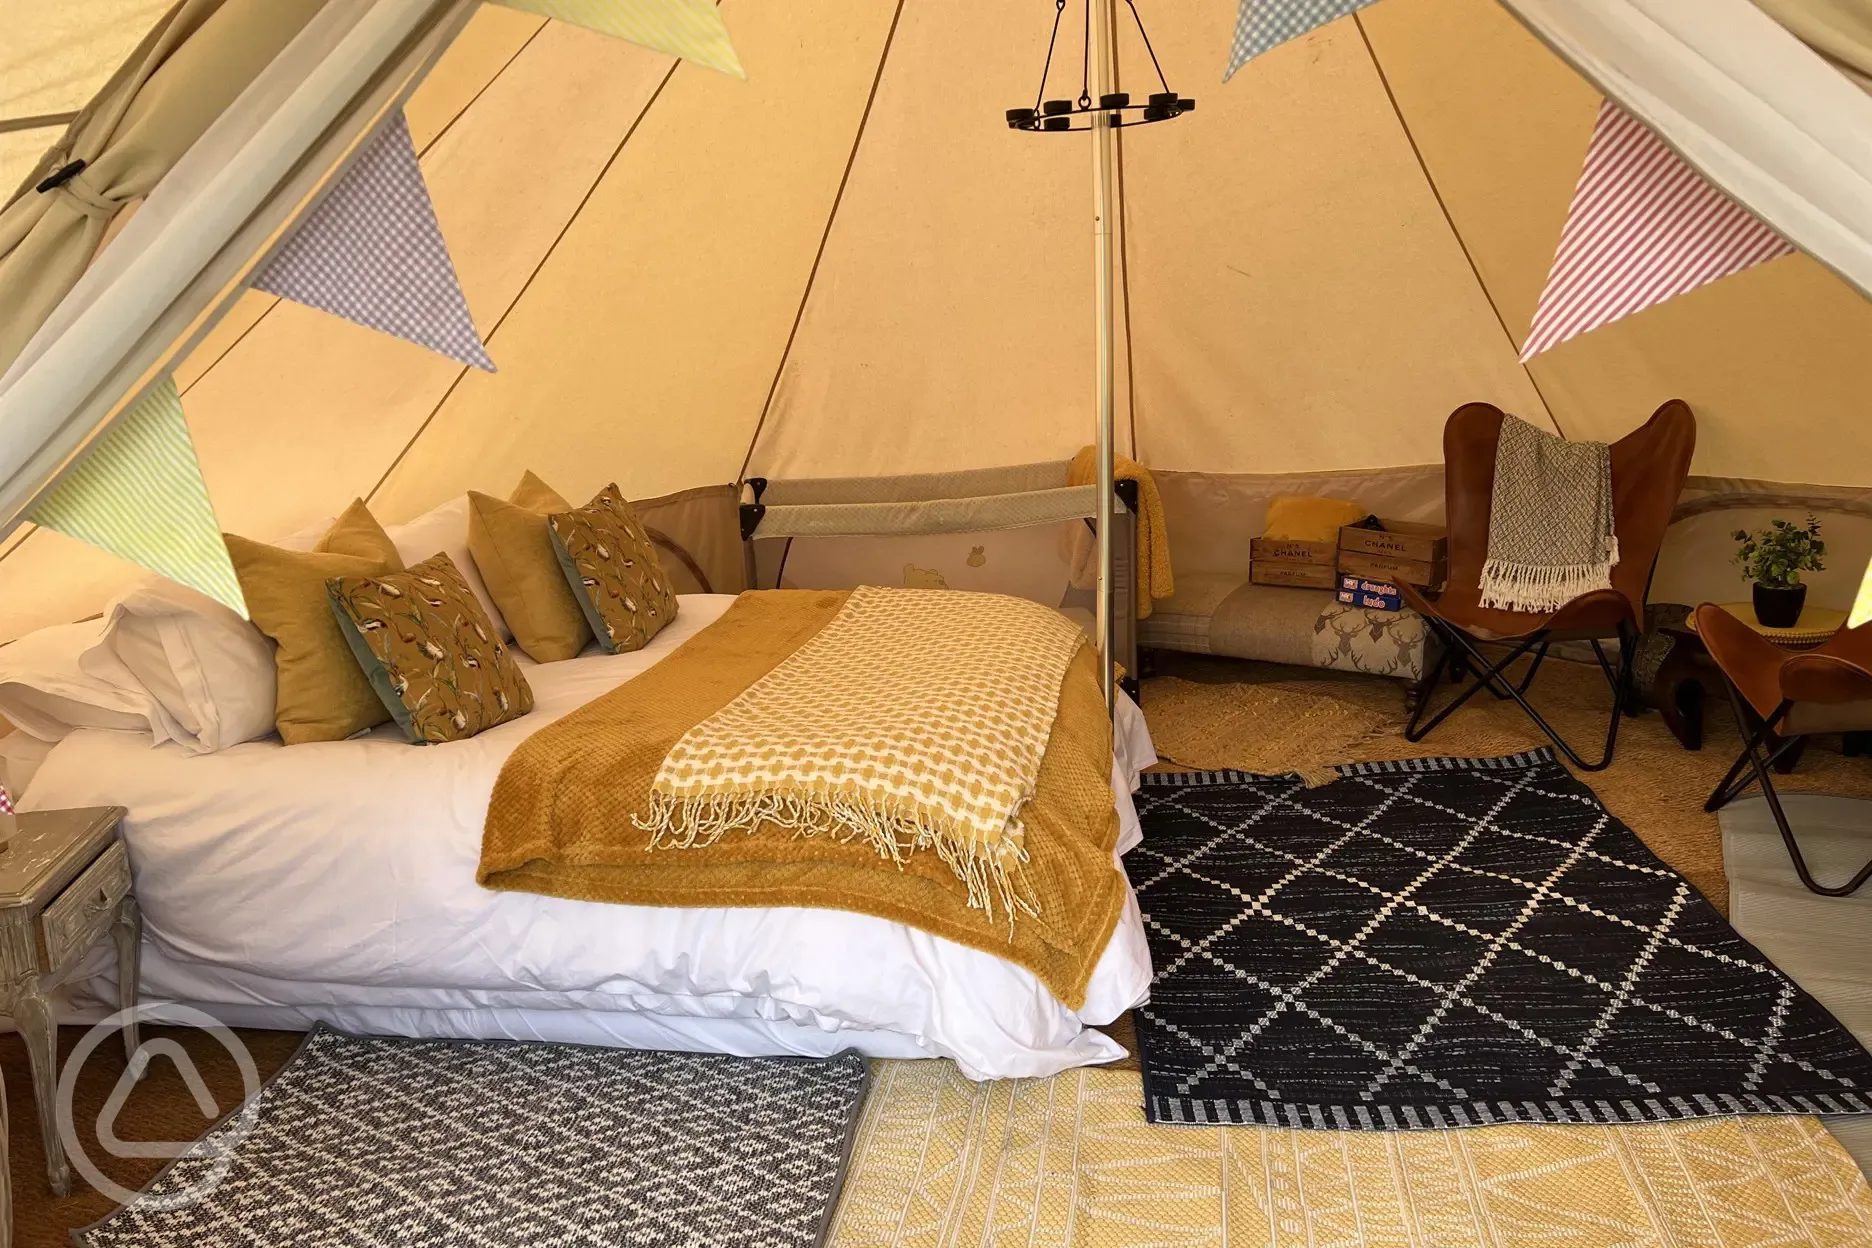 Inside the bell tent